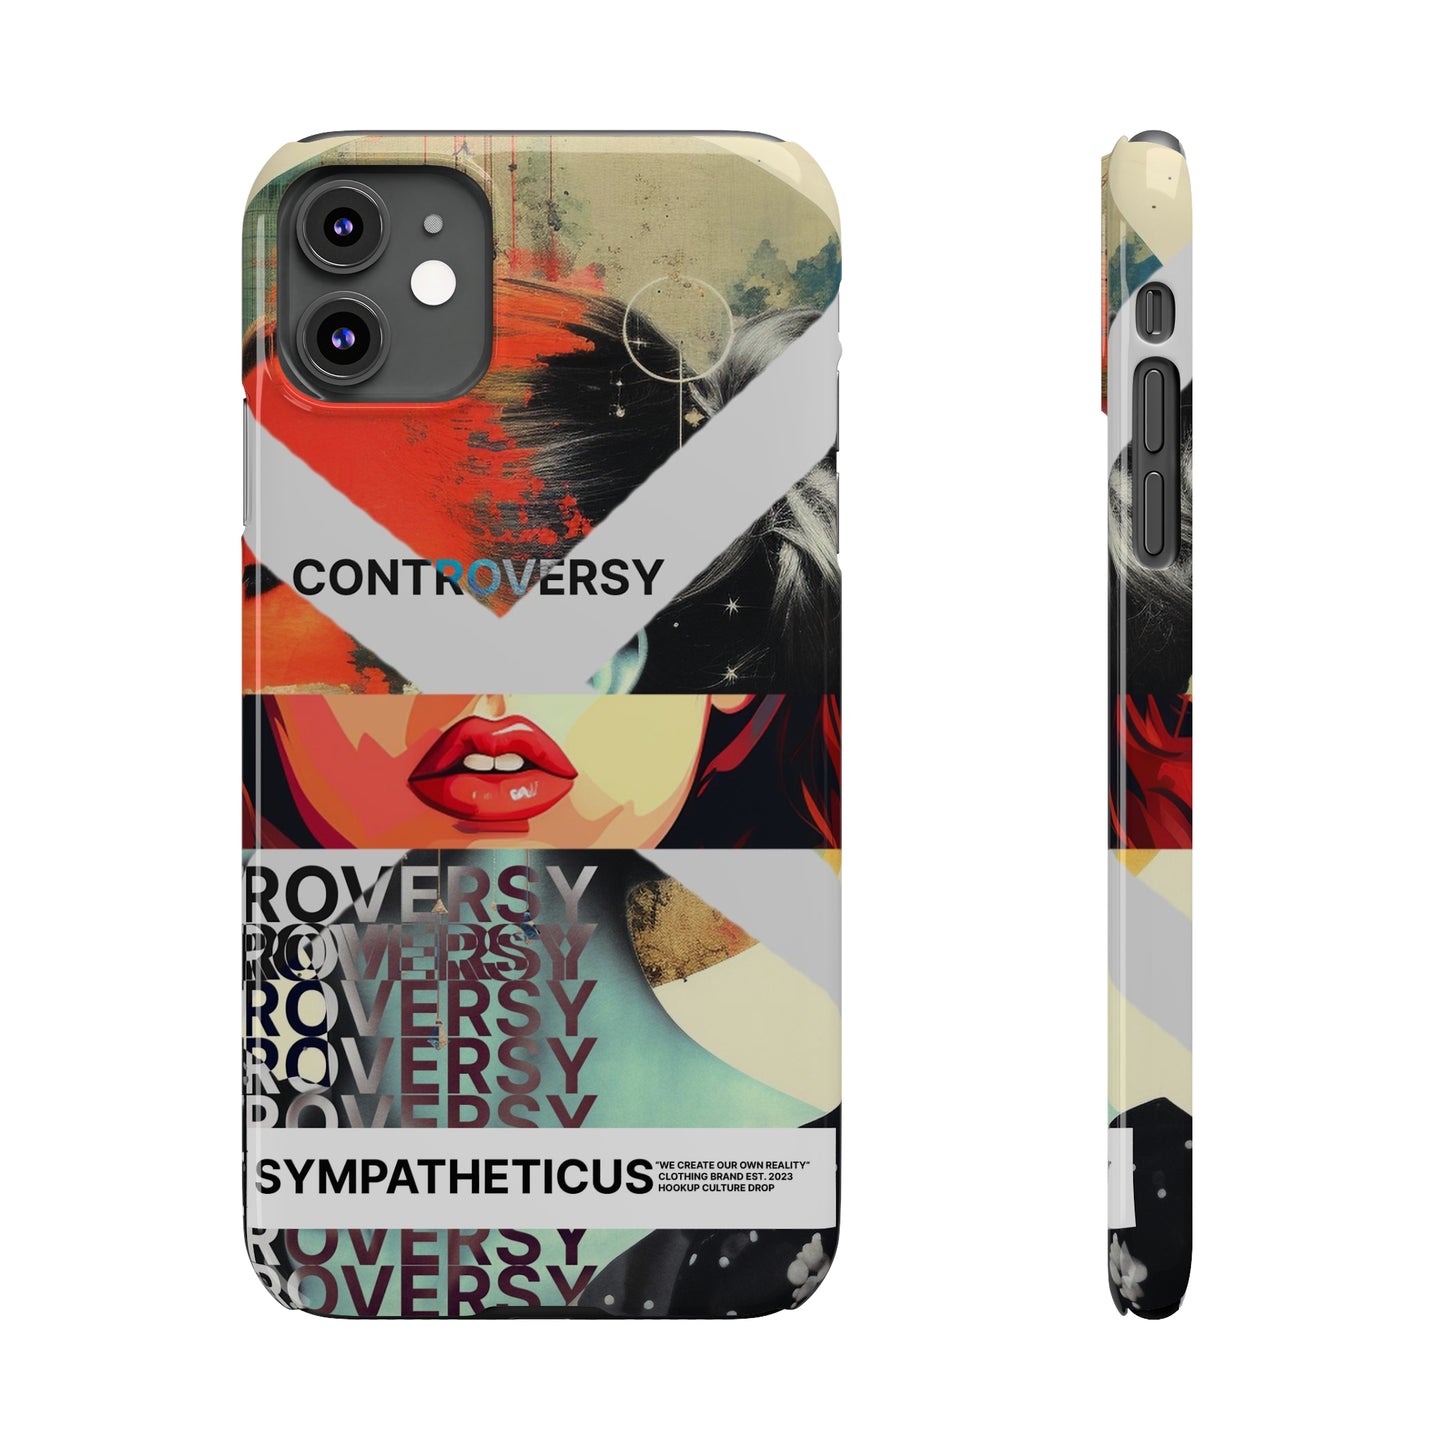 Hookup culture special iphone case-04